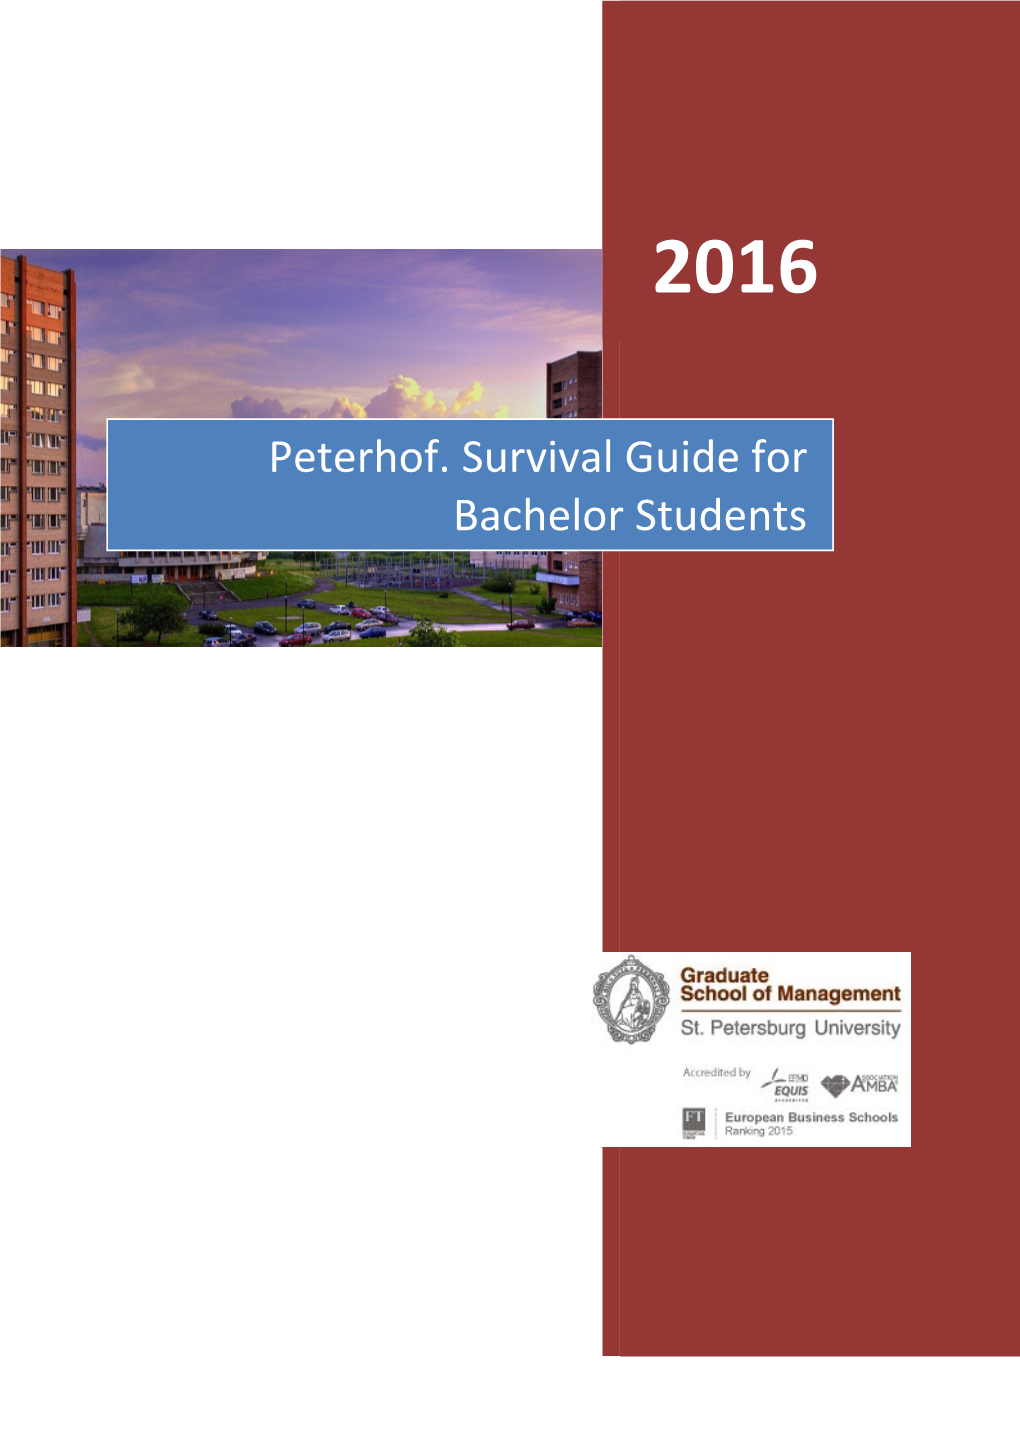 Peterhof. Survival Guide for Bachelor Students